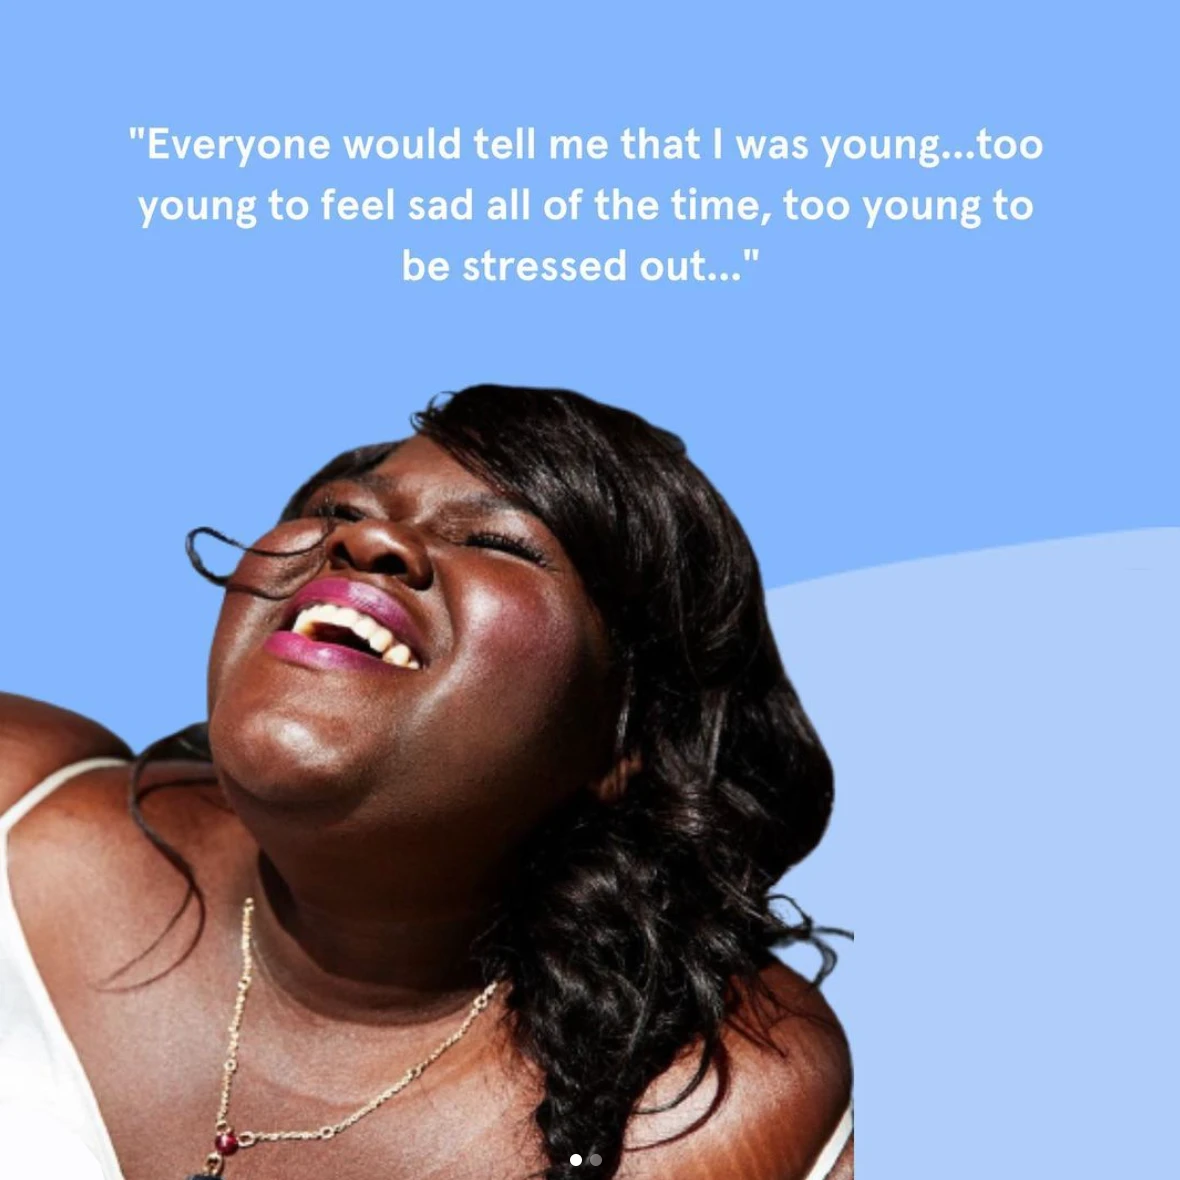 Graphic with portrait of woman singing, overlaid with a quote, "Everyone would tell me that I was young...too young to feel sad all of the time, too young to be stressed out..."